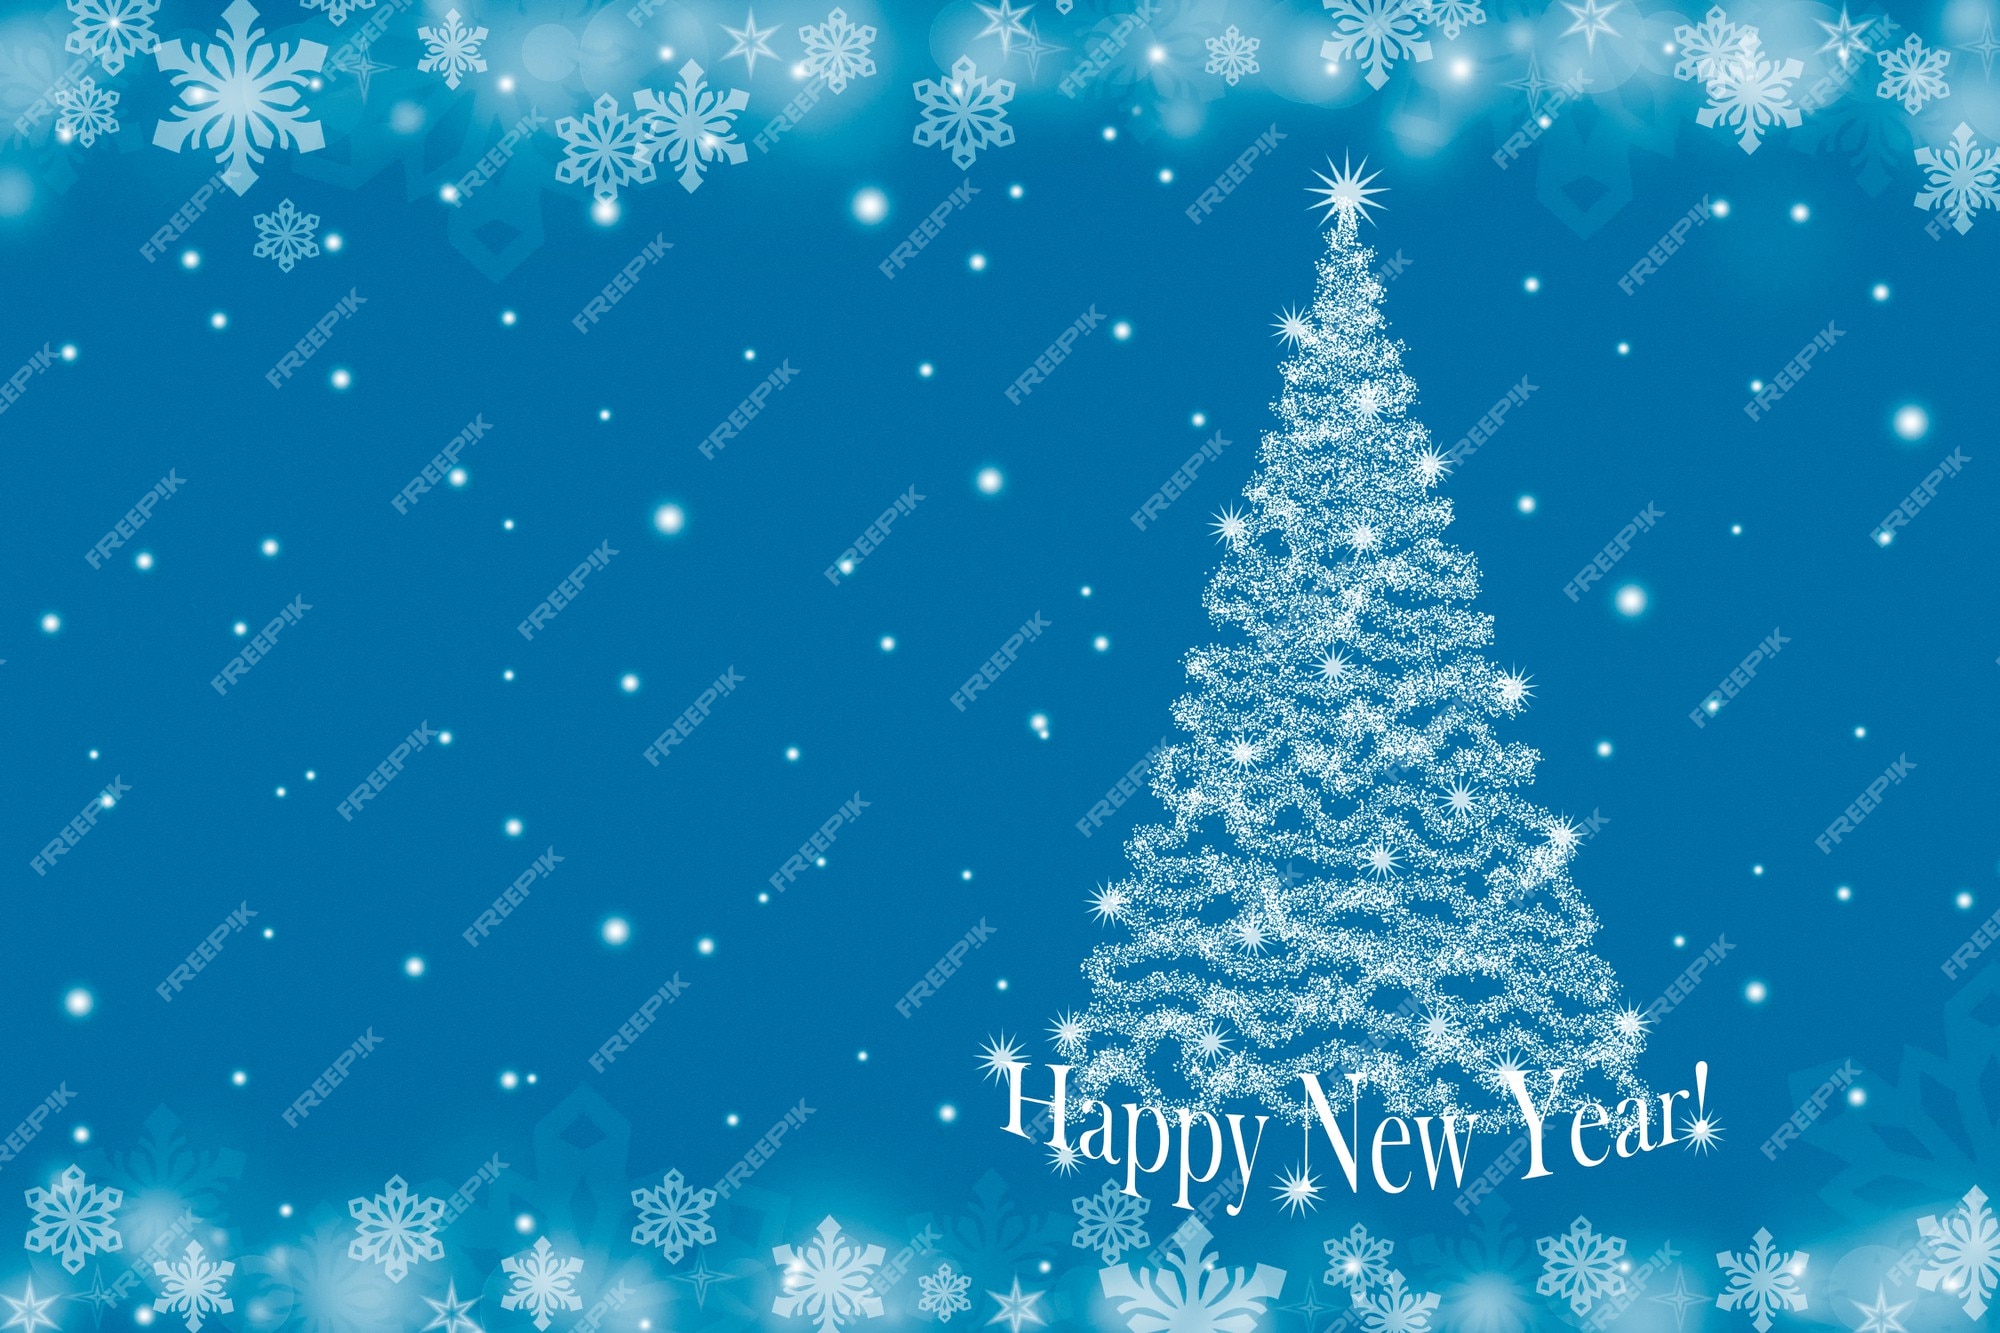 Premium Photo | Christmas background with christmas tree and snowflakes on  a blue background